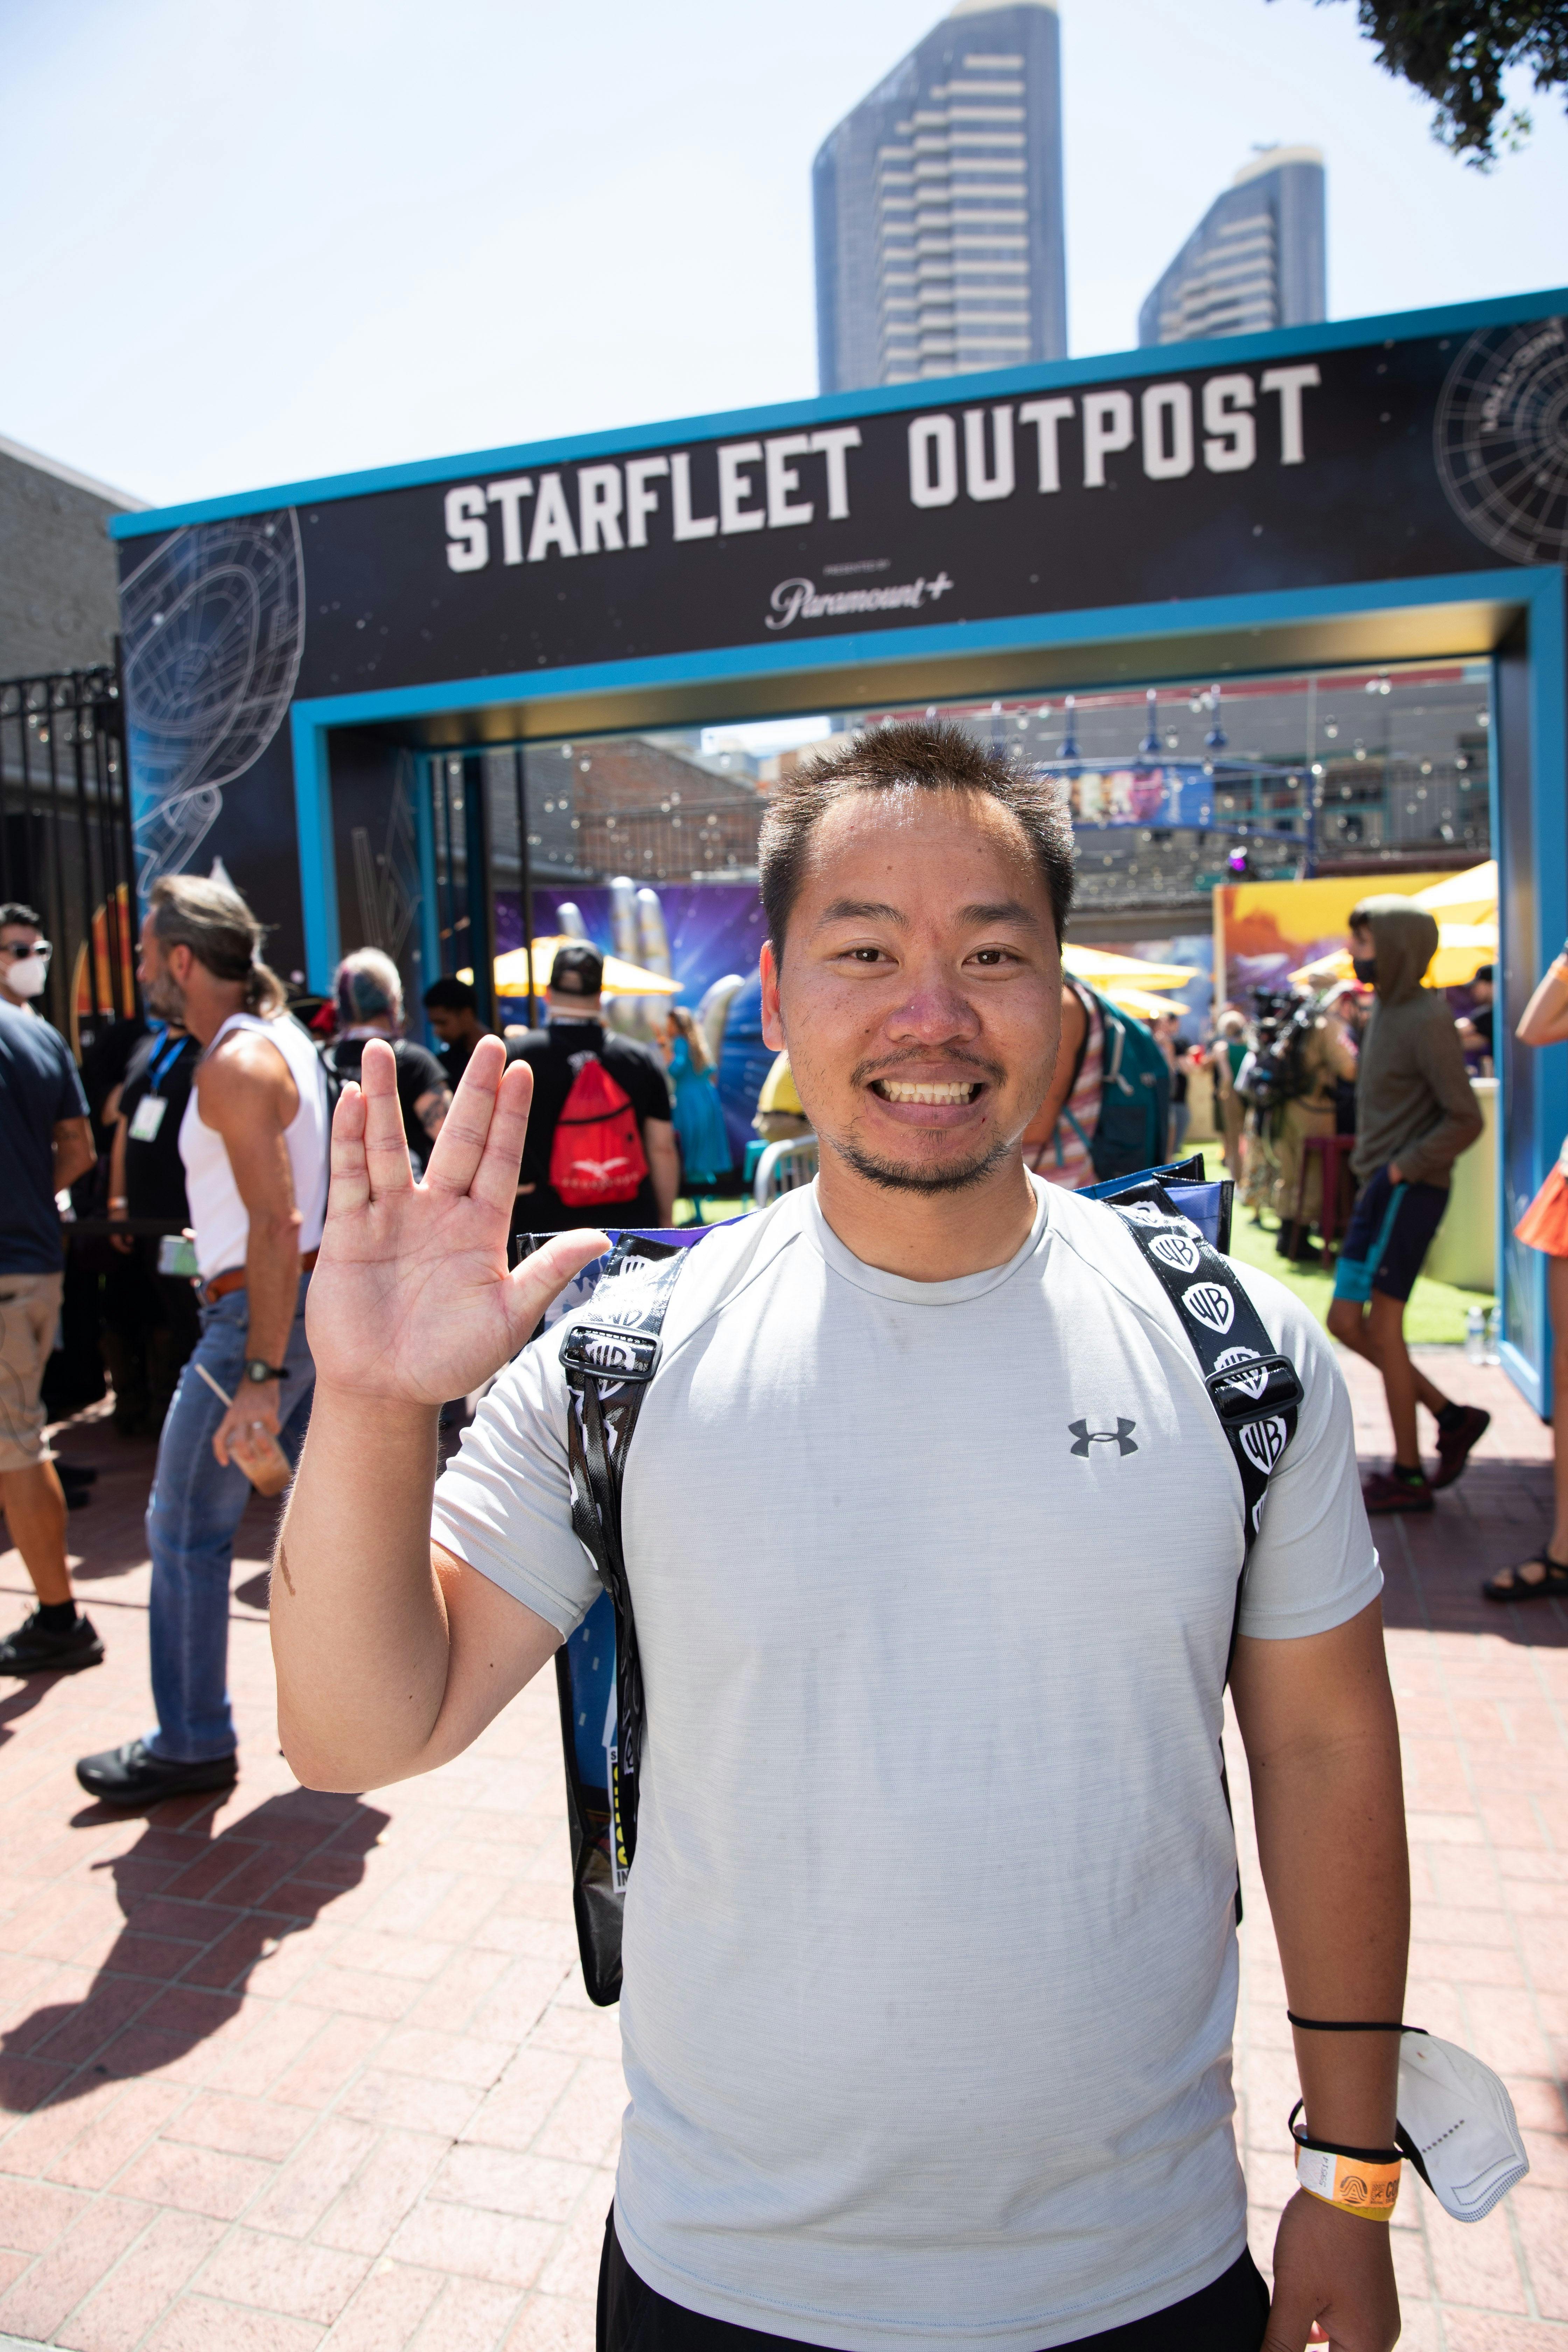 A fan smiles and gives the Vulcan salute at the entrance to the Starfleet Outpost.